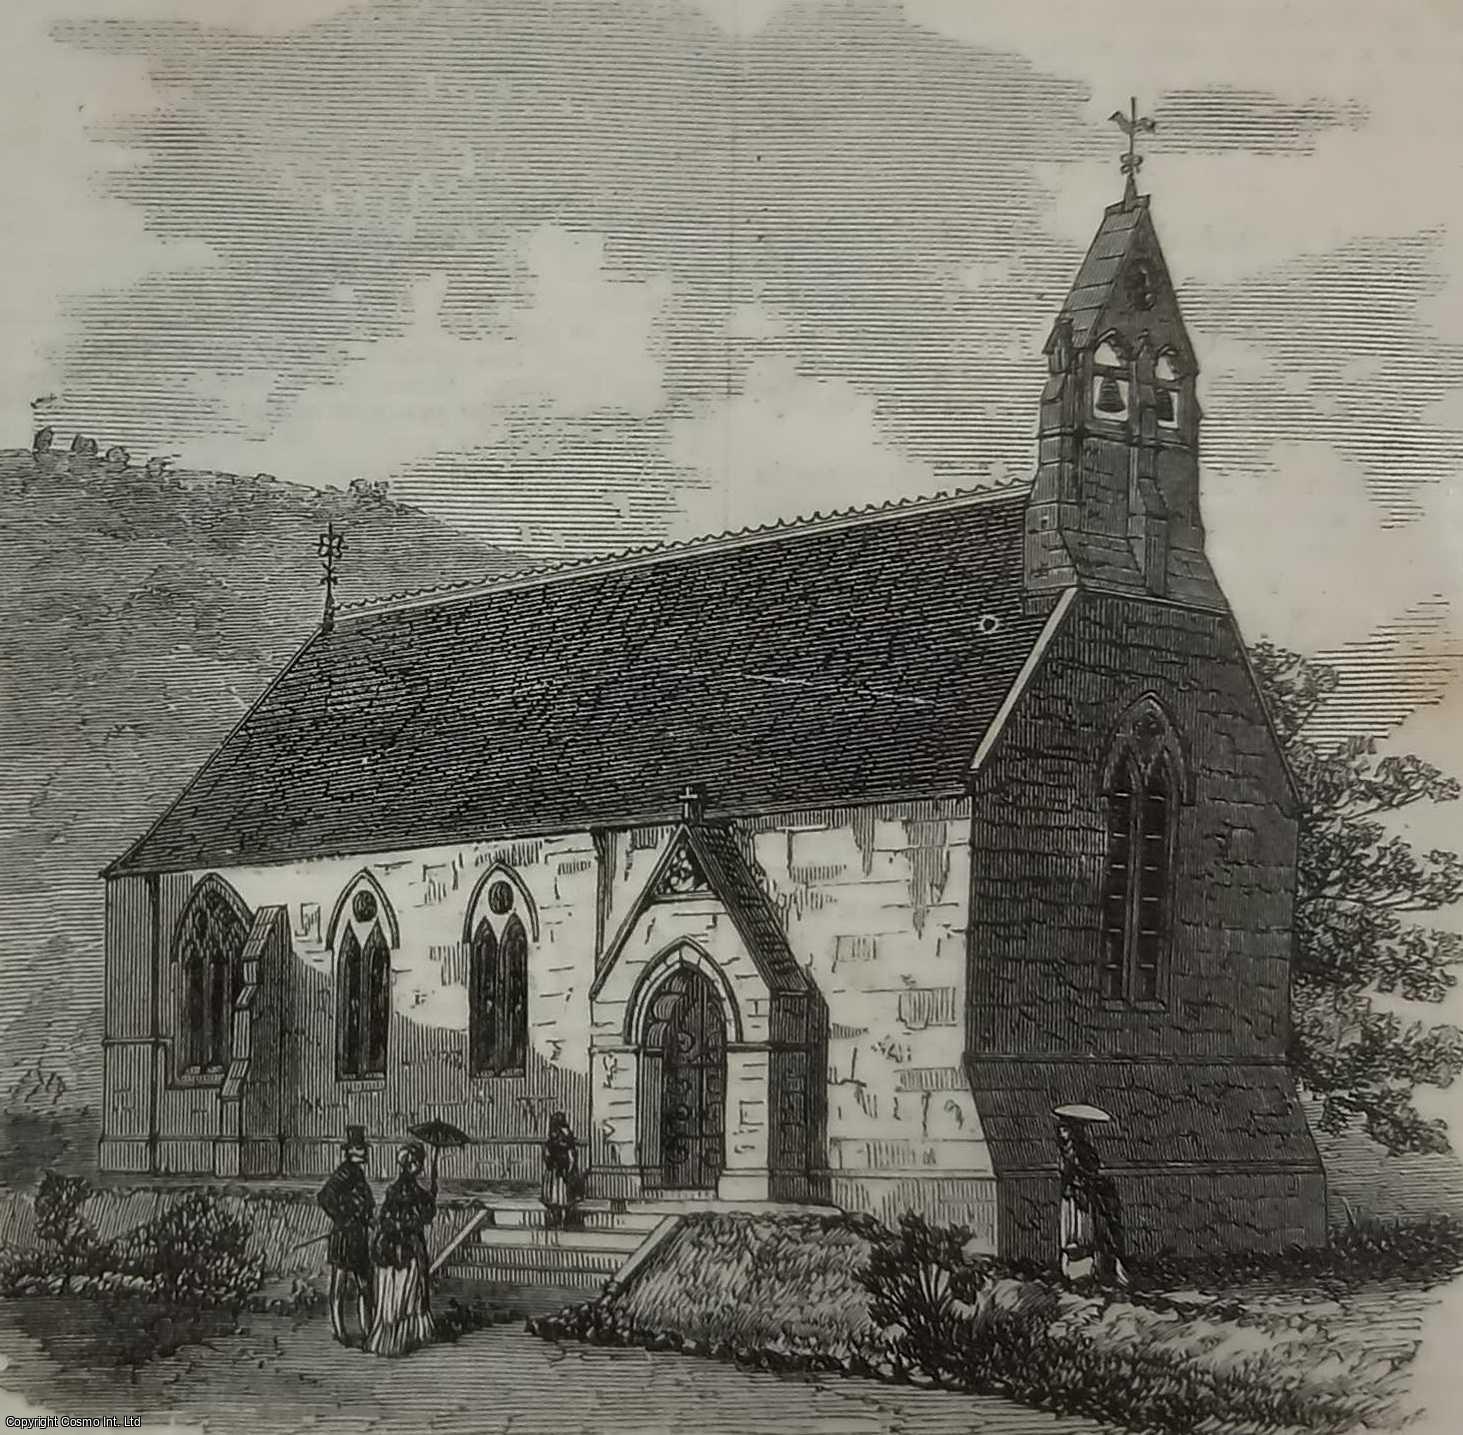 GERMANY - Holy Trinity Church, Wildbad, Wurtemberg. An original print and short accompanying article from the Illustrated London News, 1869.